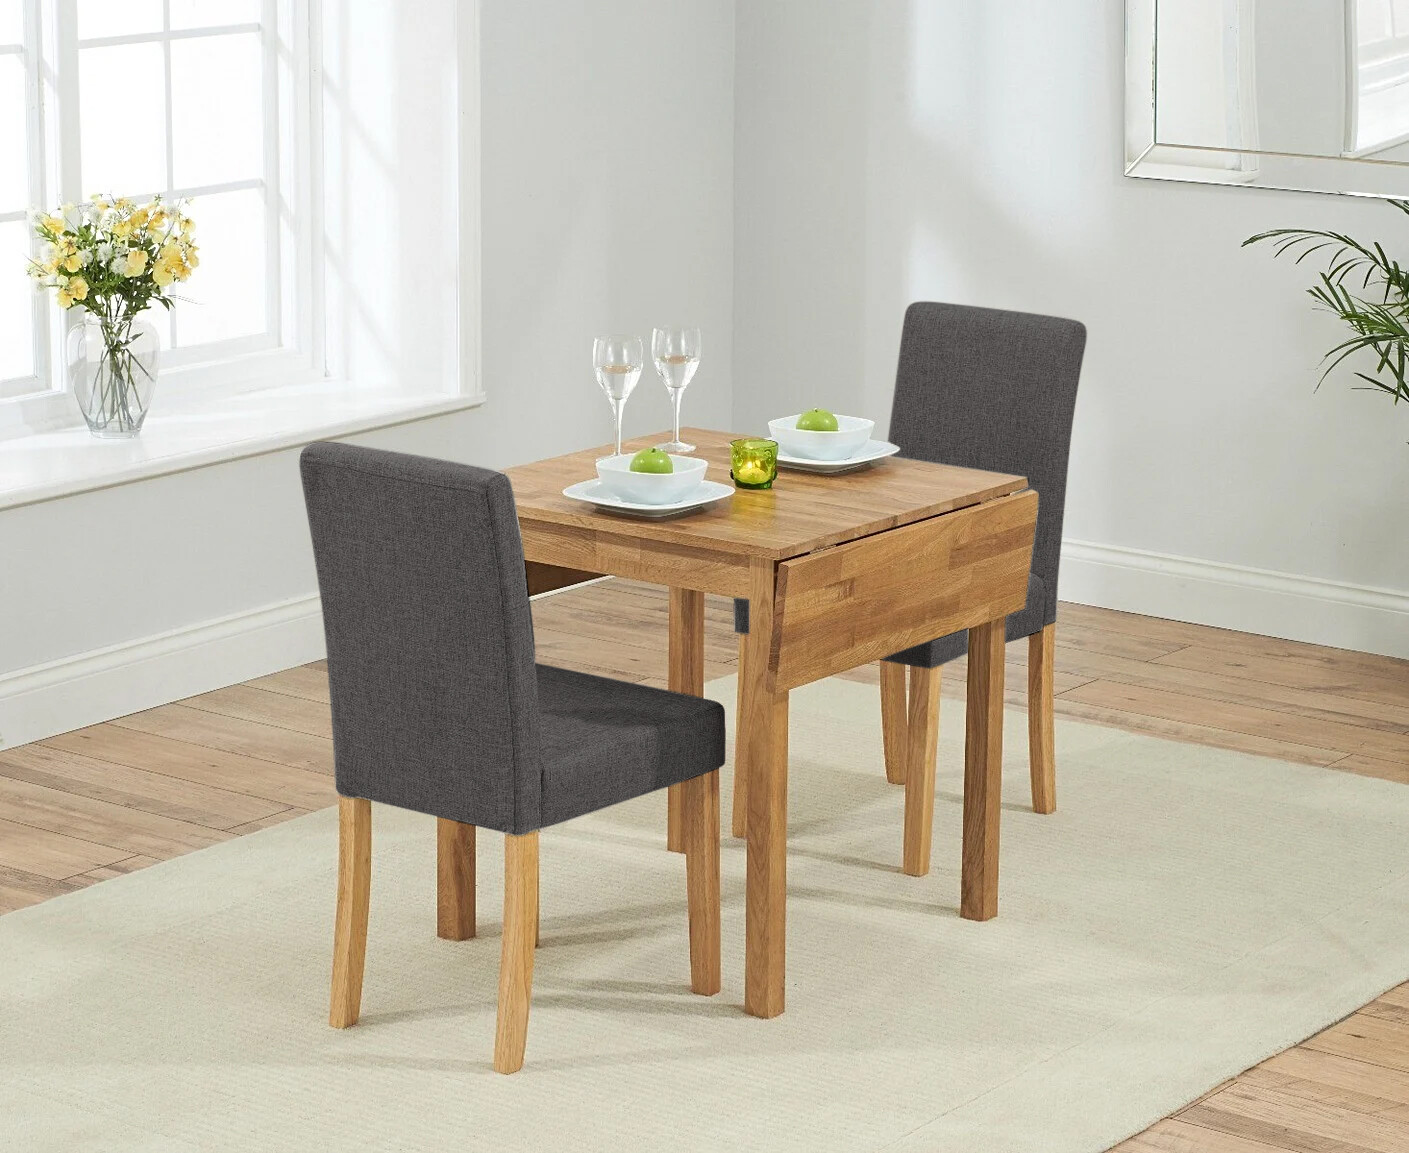 Photo 2 of Extending york 70cm solid oak drop leaf dining table with 4 grey lila chairs